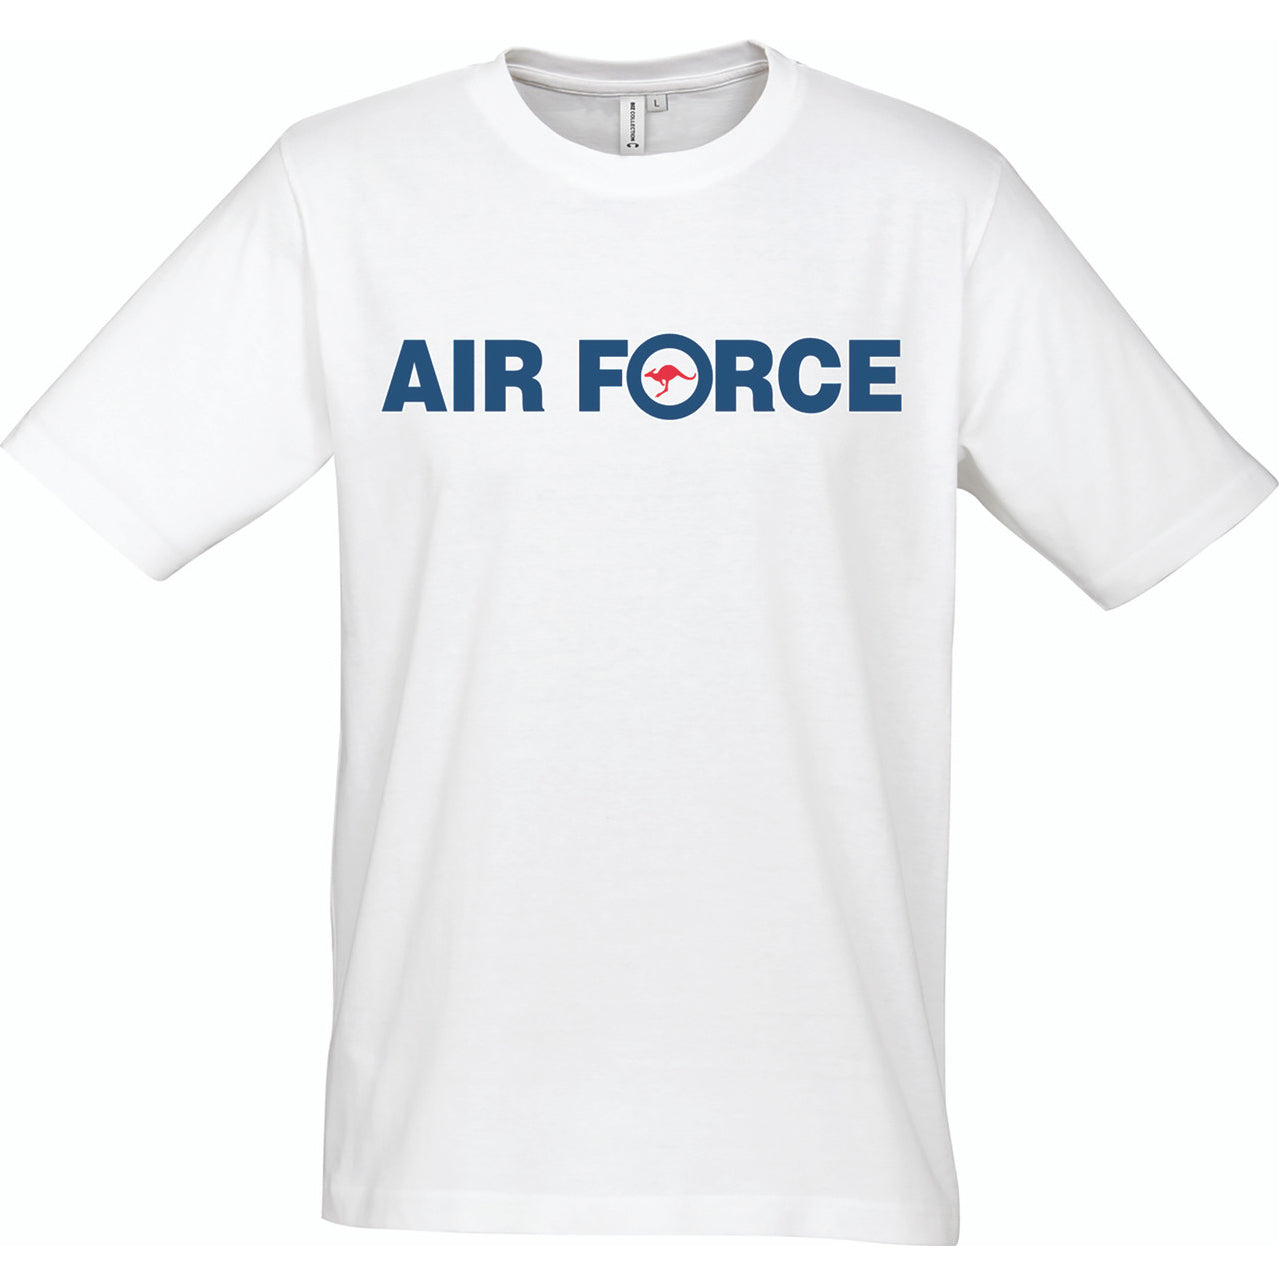 The Royal Australian Air Force branded T-Shirt with colour printed RAAF logo on chest. Supersoft combed cotton for maximum comfort.  Specifications:  Materials: Supersoft combed cotton Colour: White, navy, red Size: XS - 2XL www.defenceqstore.com.au